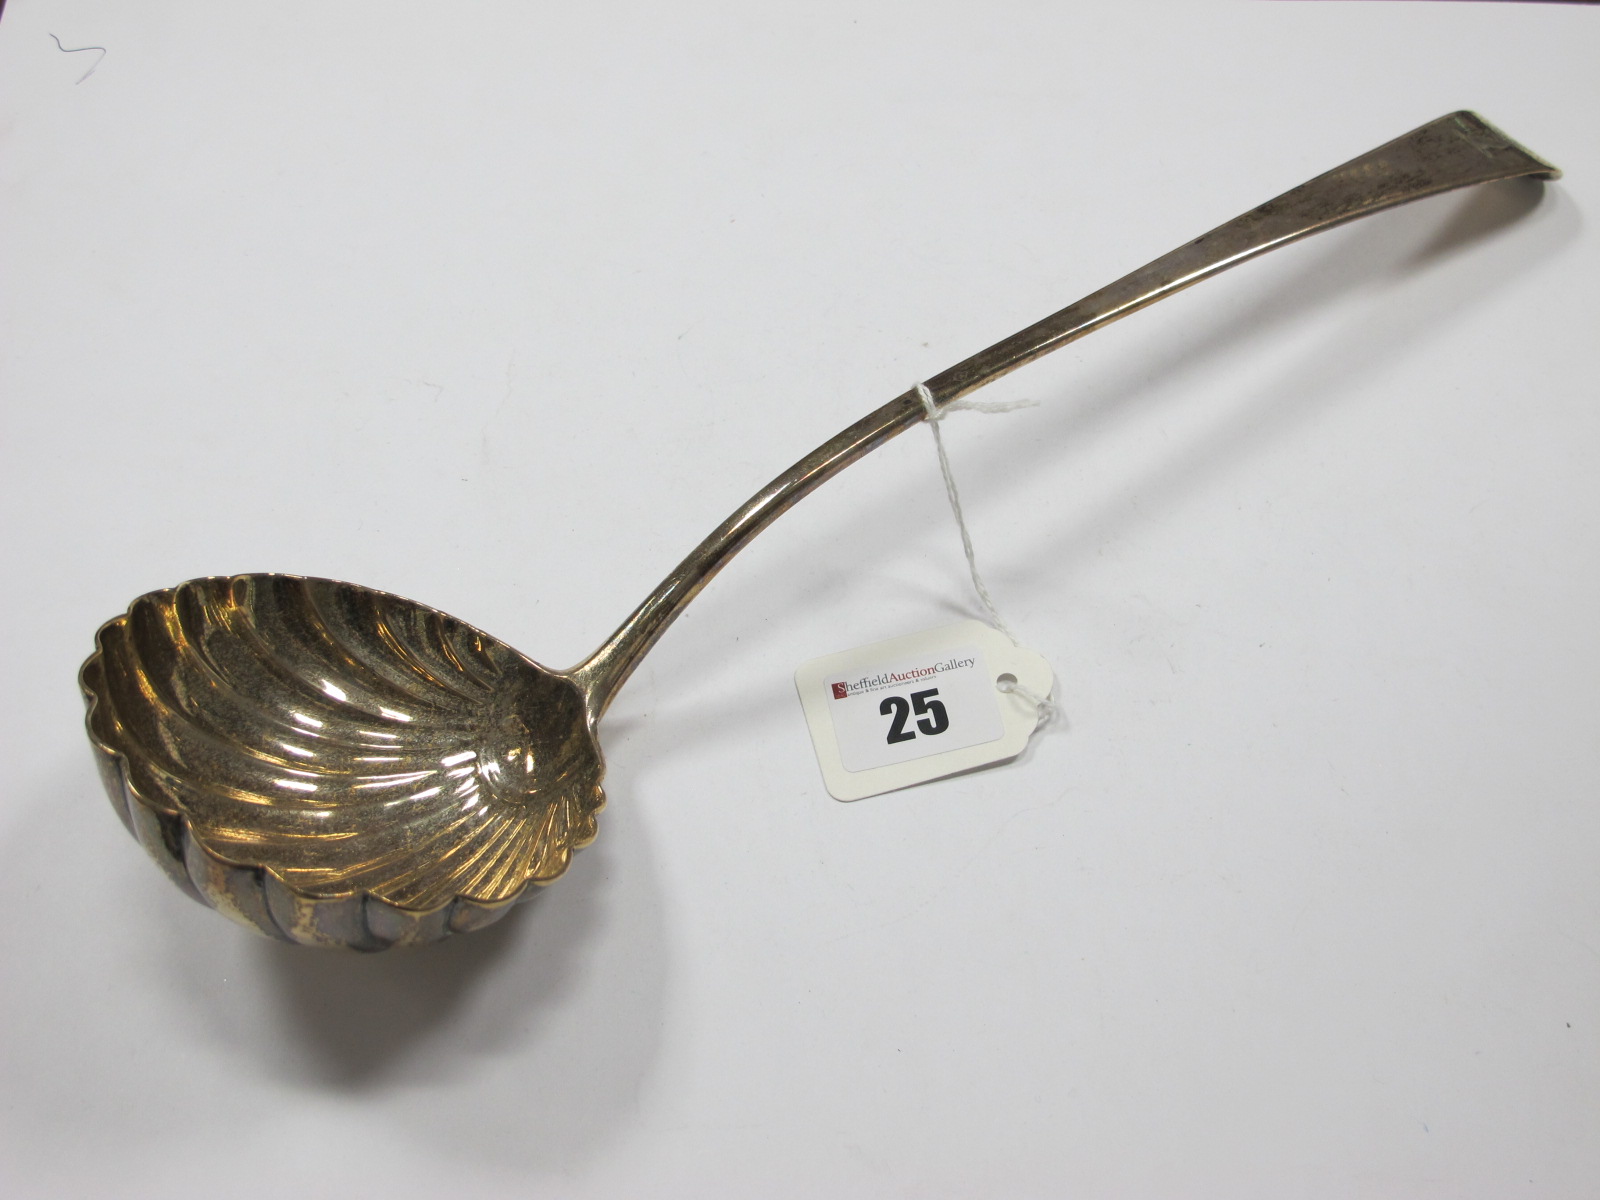 A Hallmarked Silver Old English Pattern Ladle, George Smith & William Fearn, London 1791, with shell